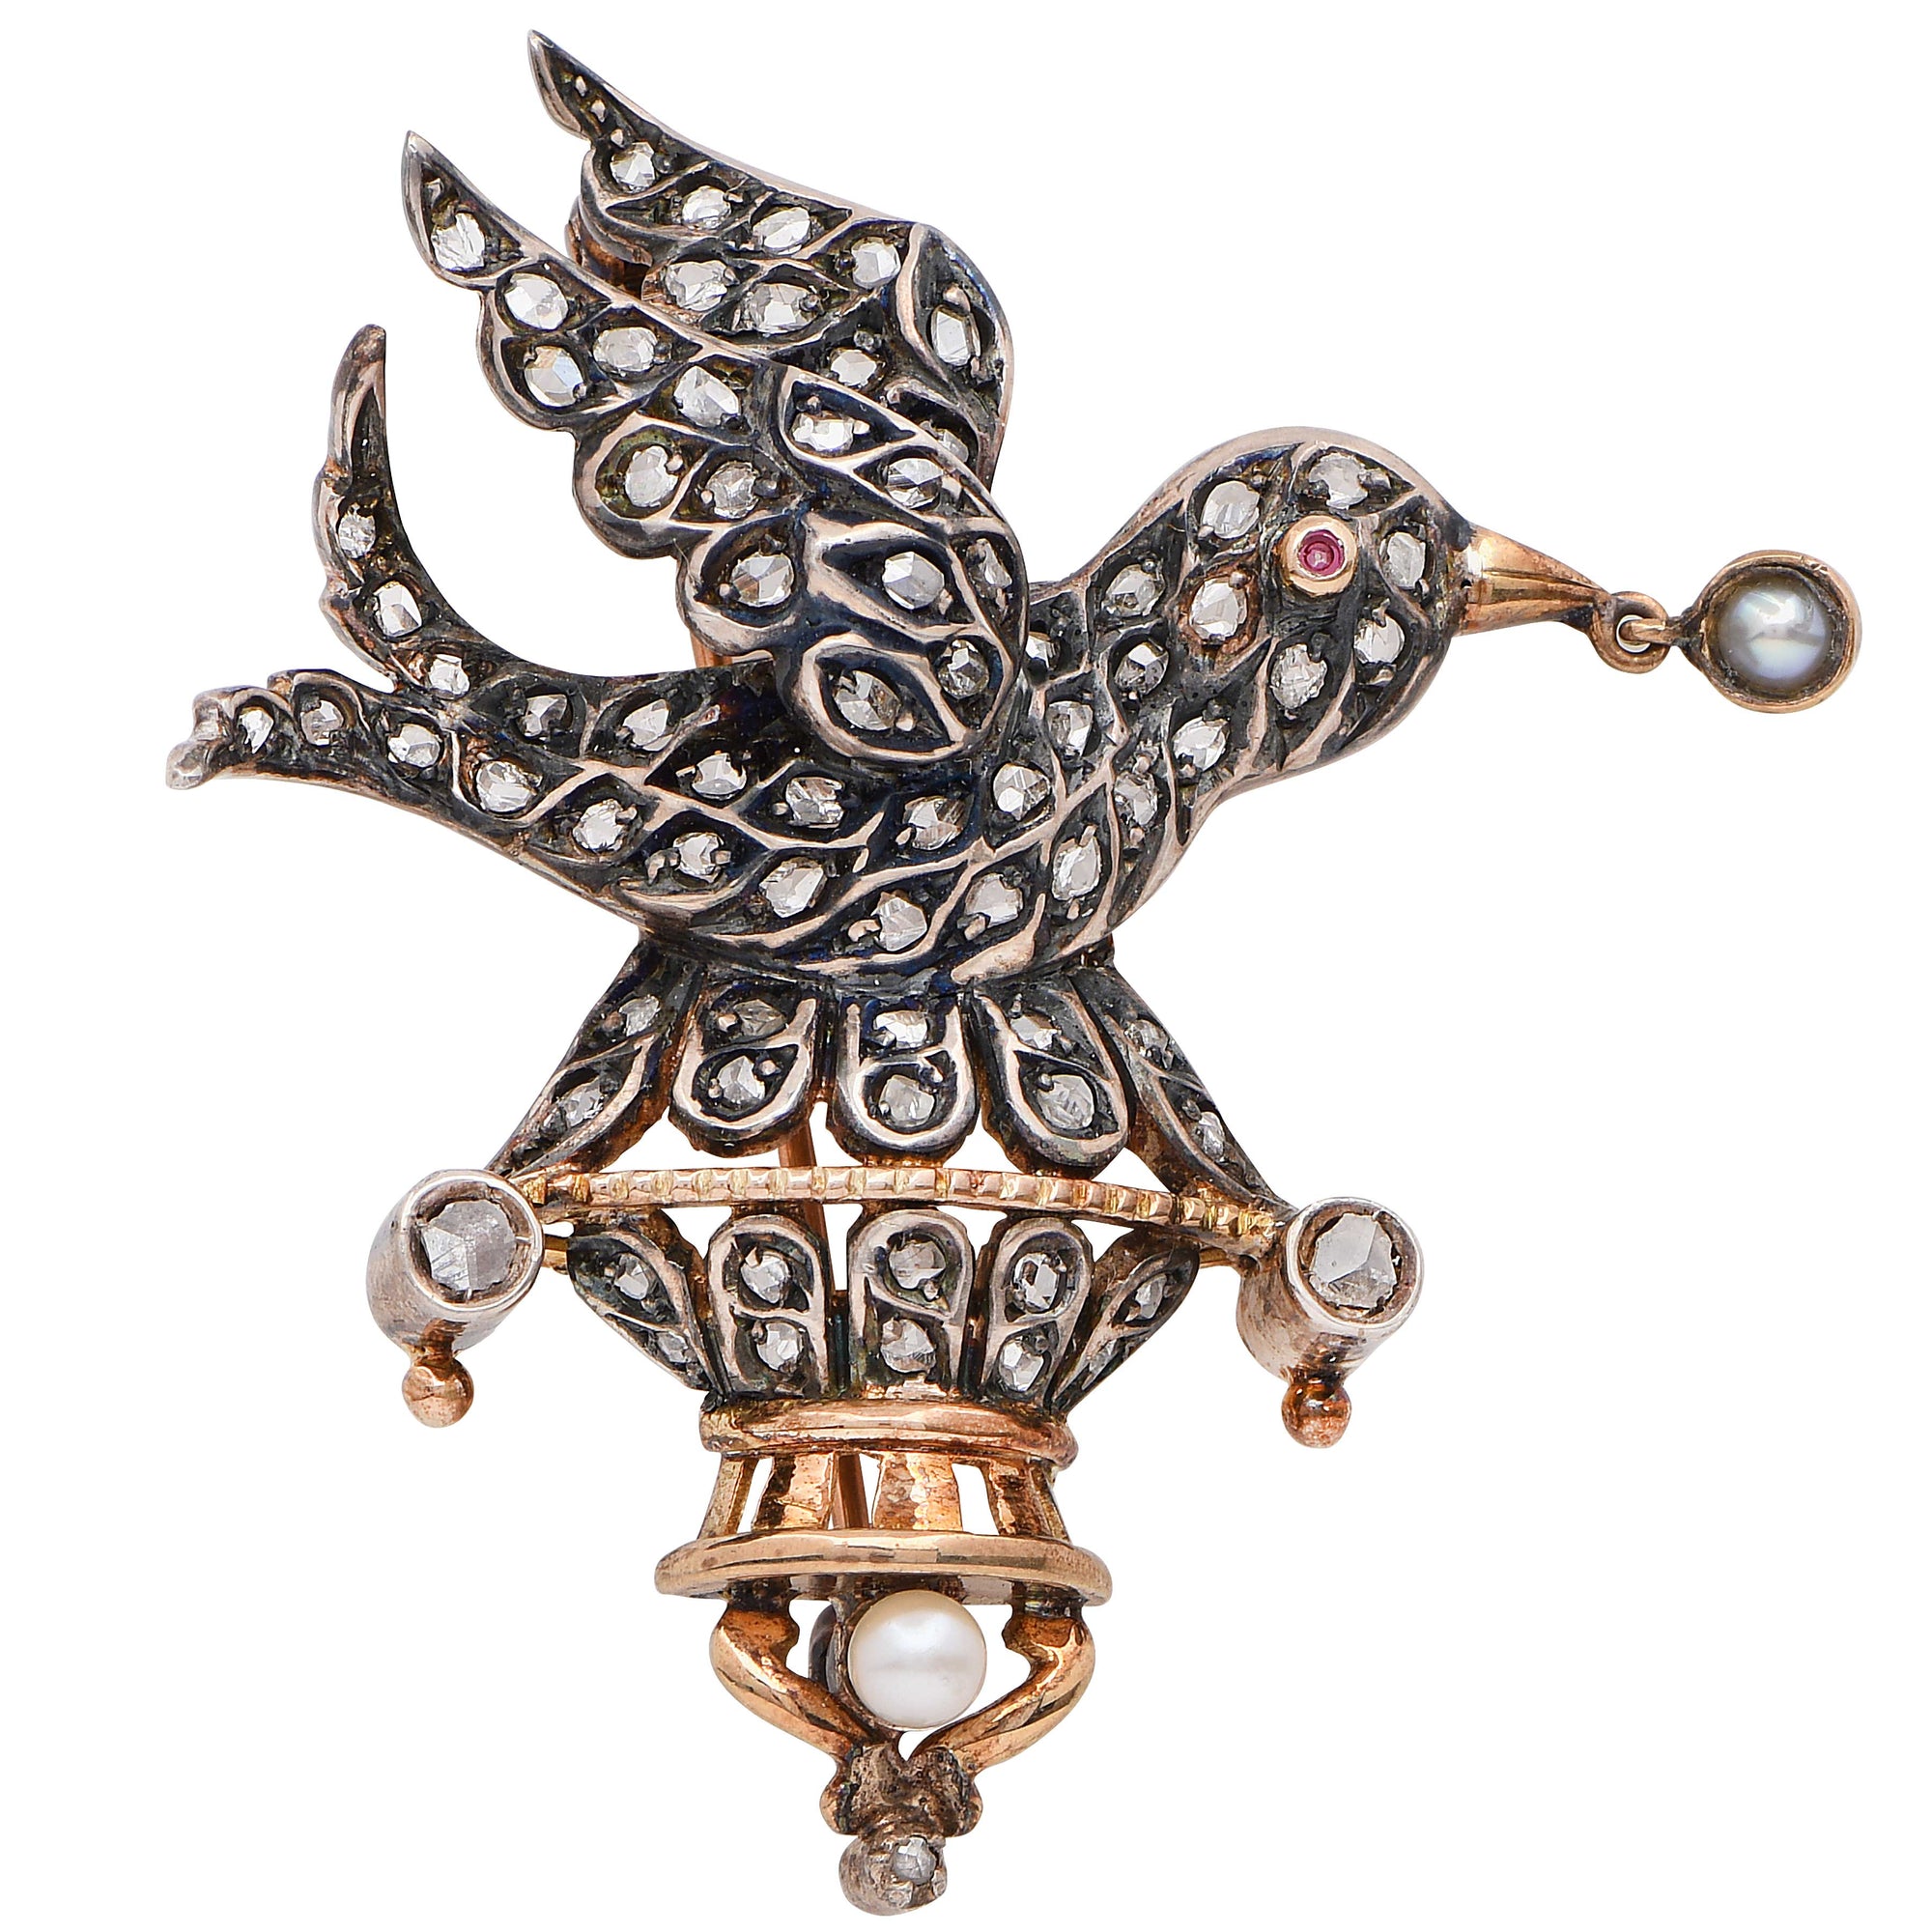 Victorian Bird Brooch with Rose Cut Diamonds Set in Silver-Topped Gold